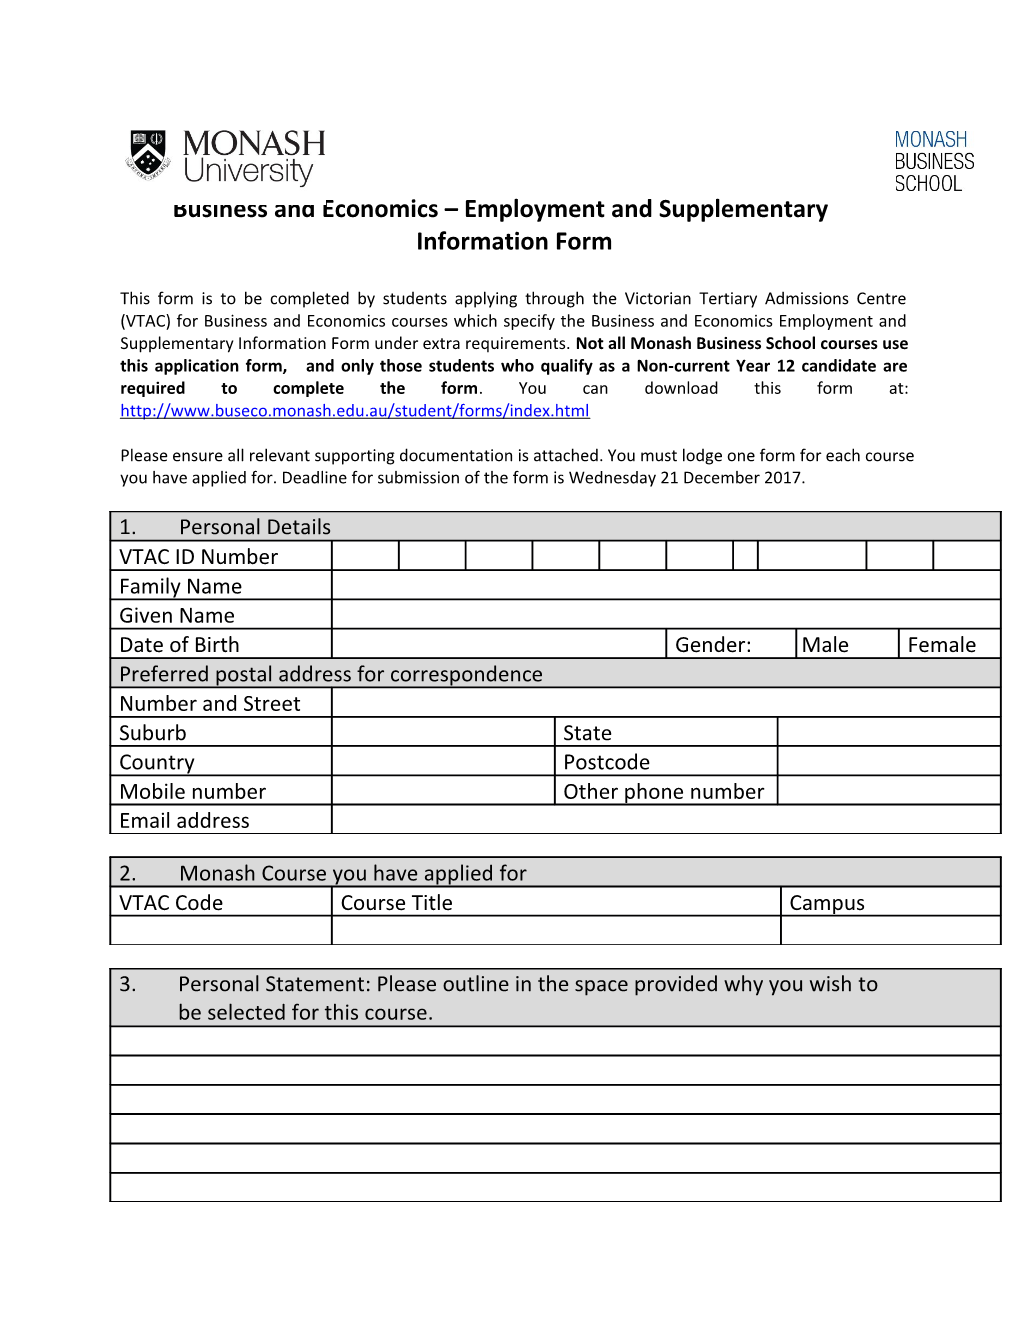 Business and Economics Employment and Supplementary Information Form